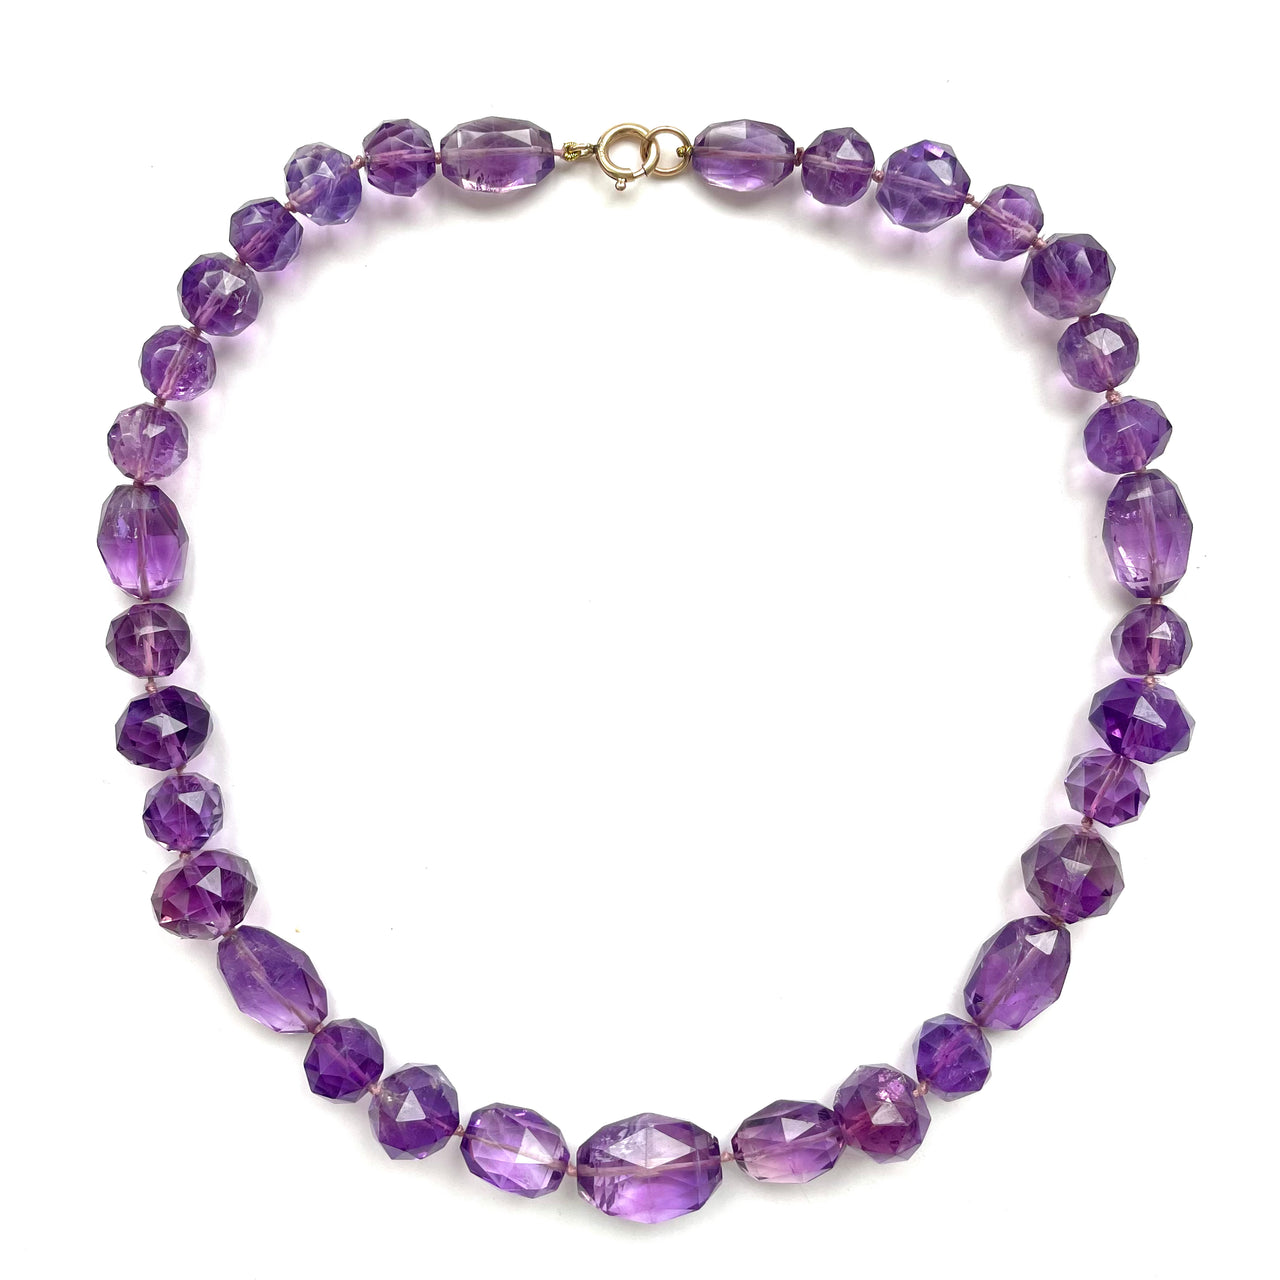 Vintage Faceted Amethyst Beads Necklace